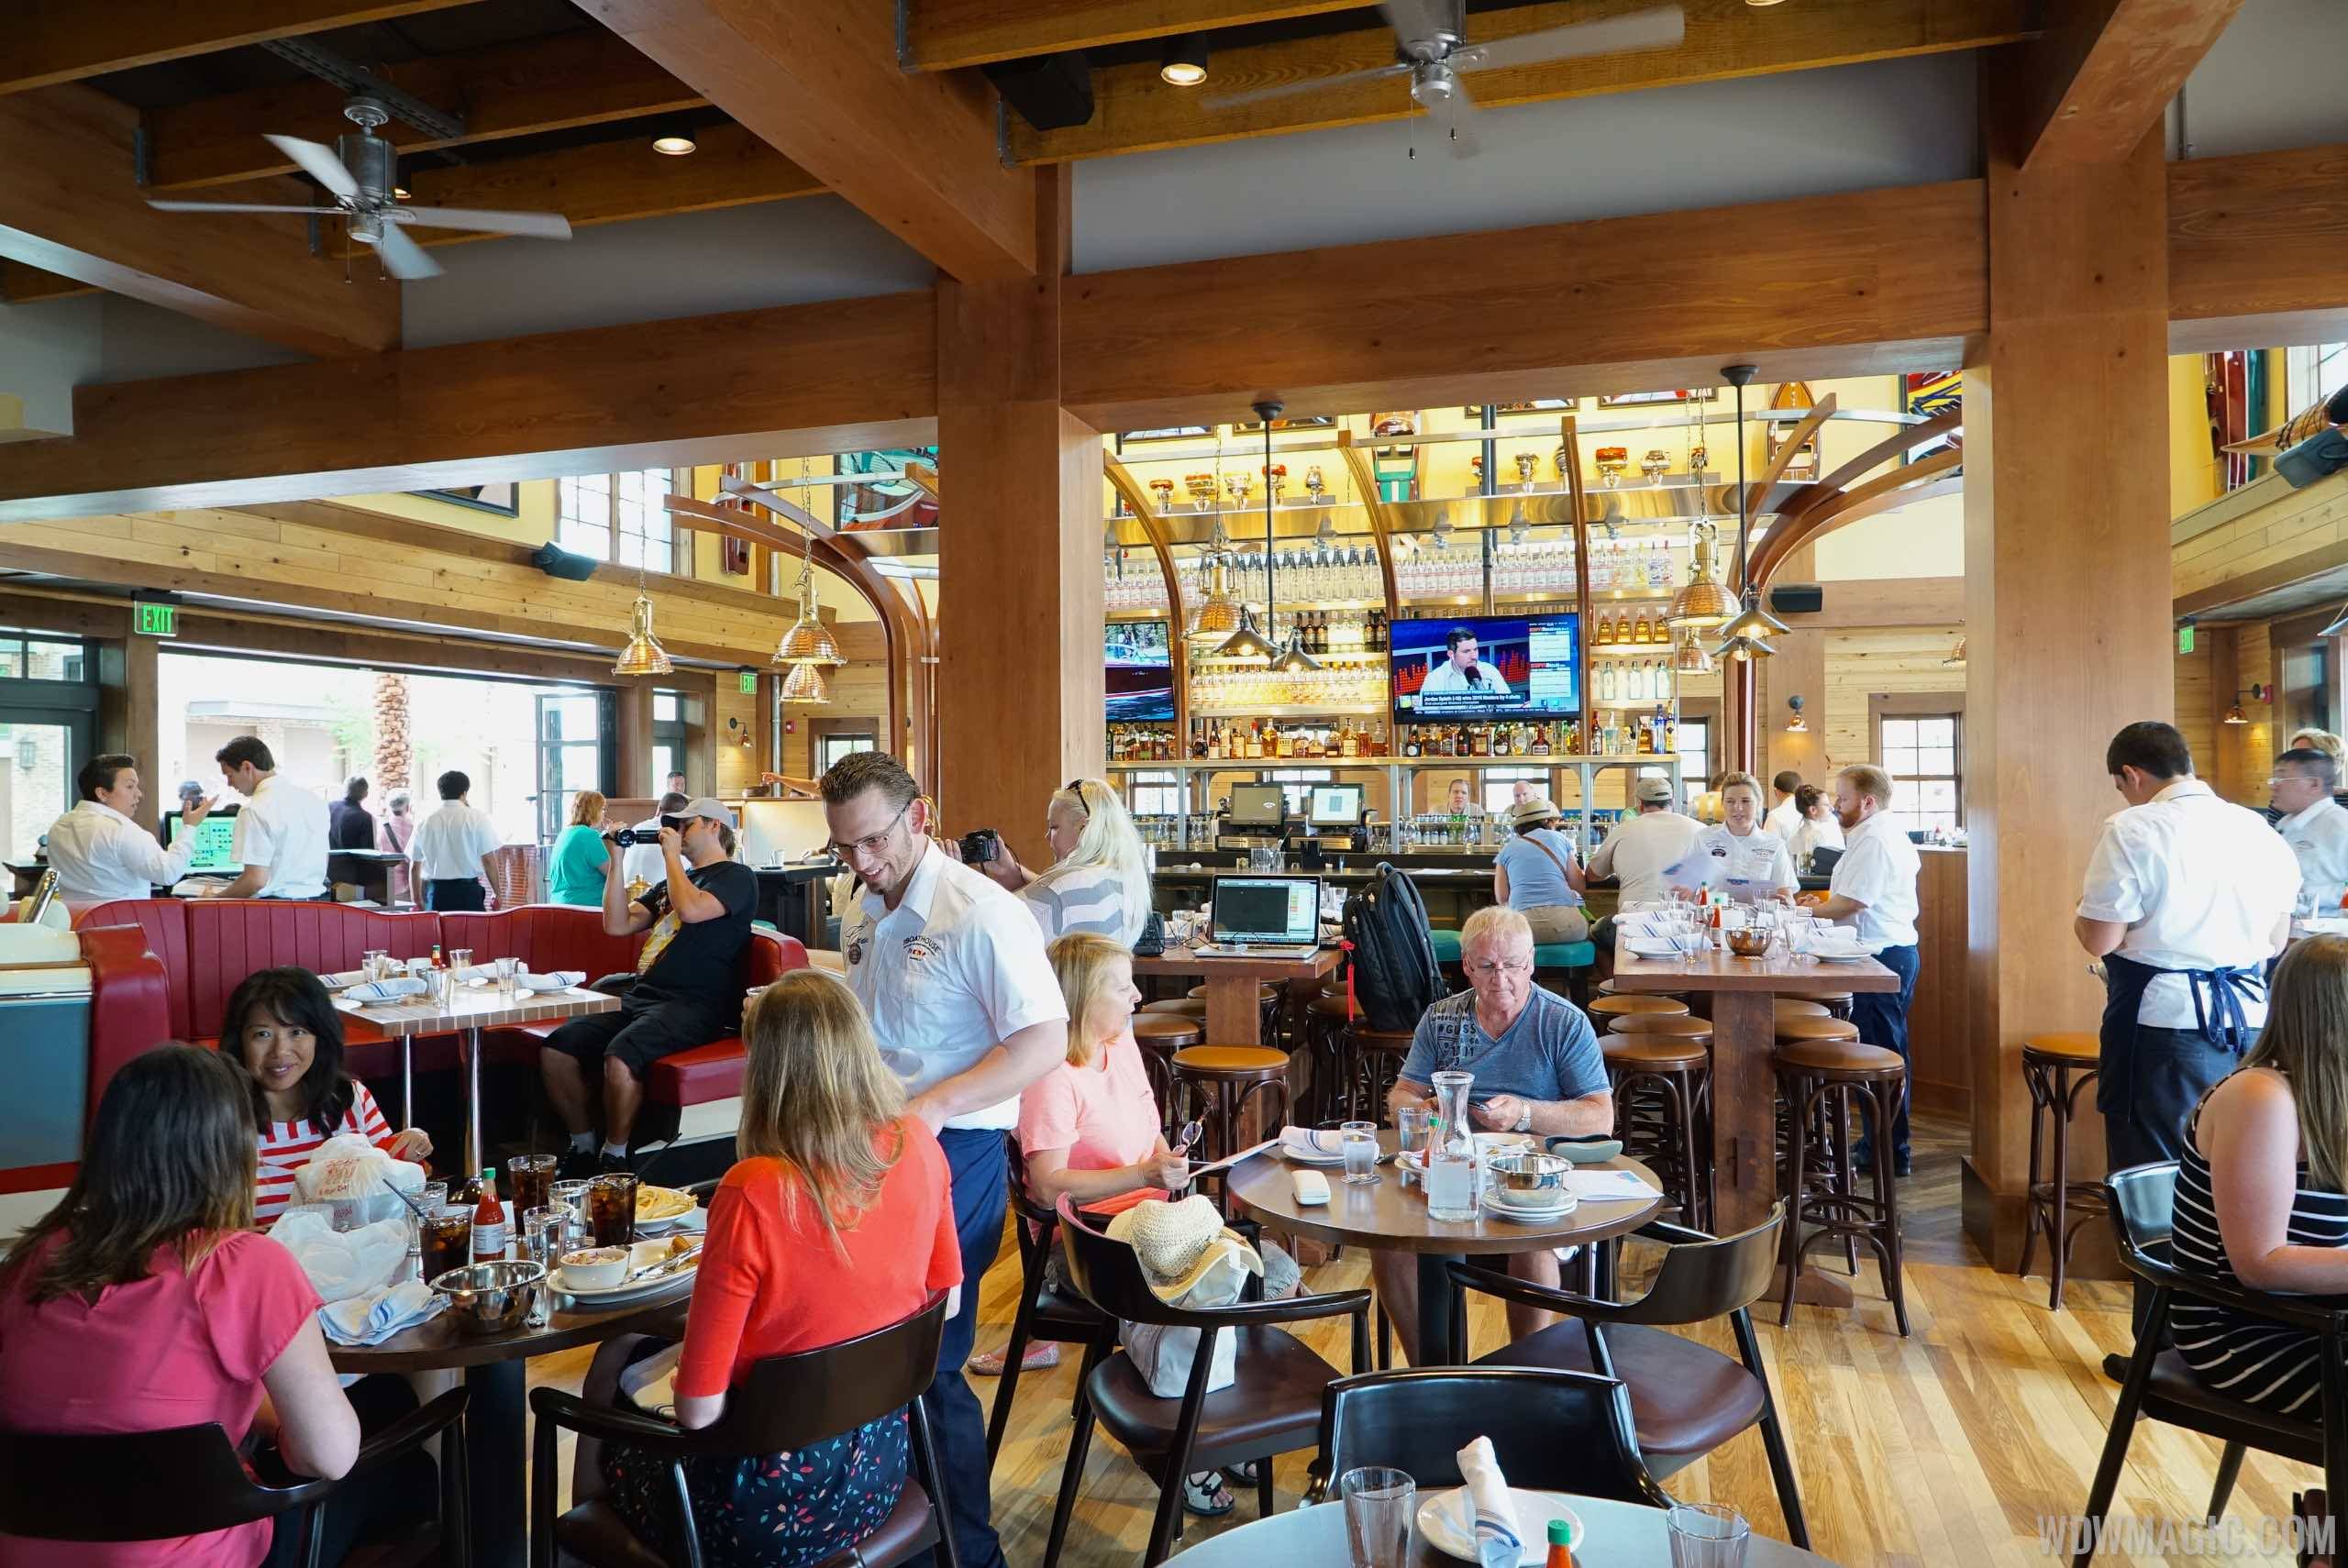 Reservations now available for The BOATHOUSE at Disney Springs